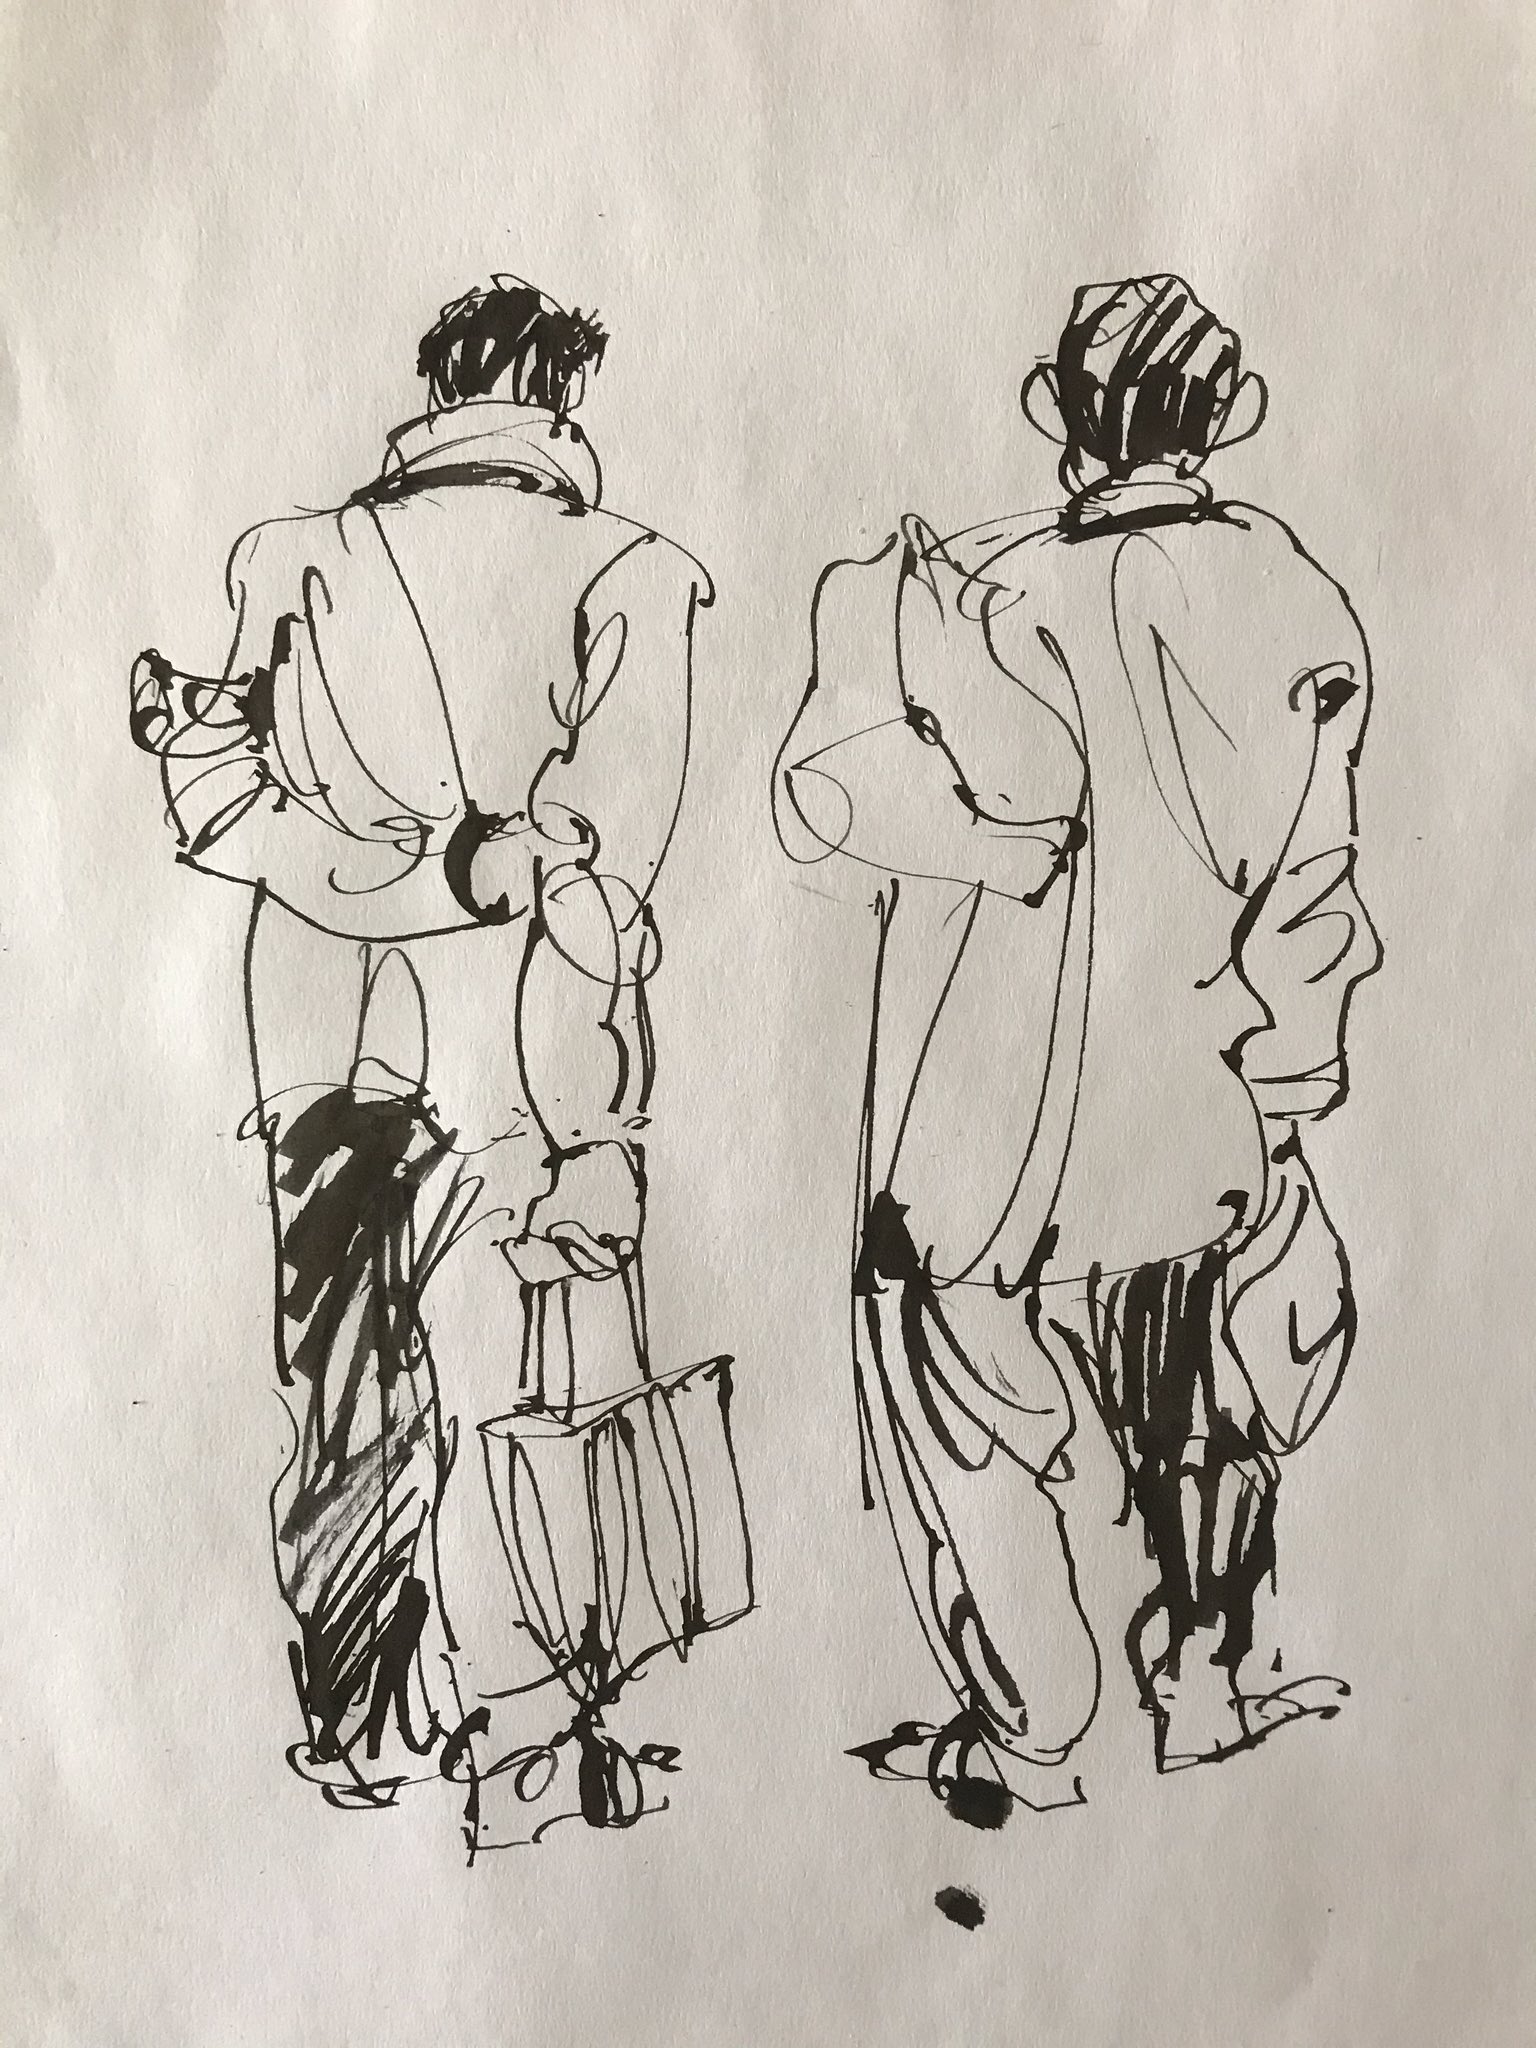 Prakash Thombre on X: Rapid Sketches #drawing #practicing #sketch